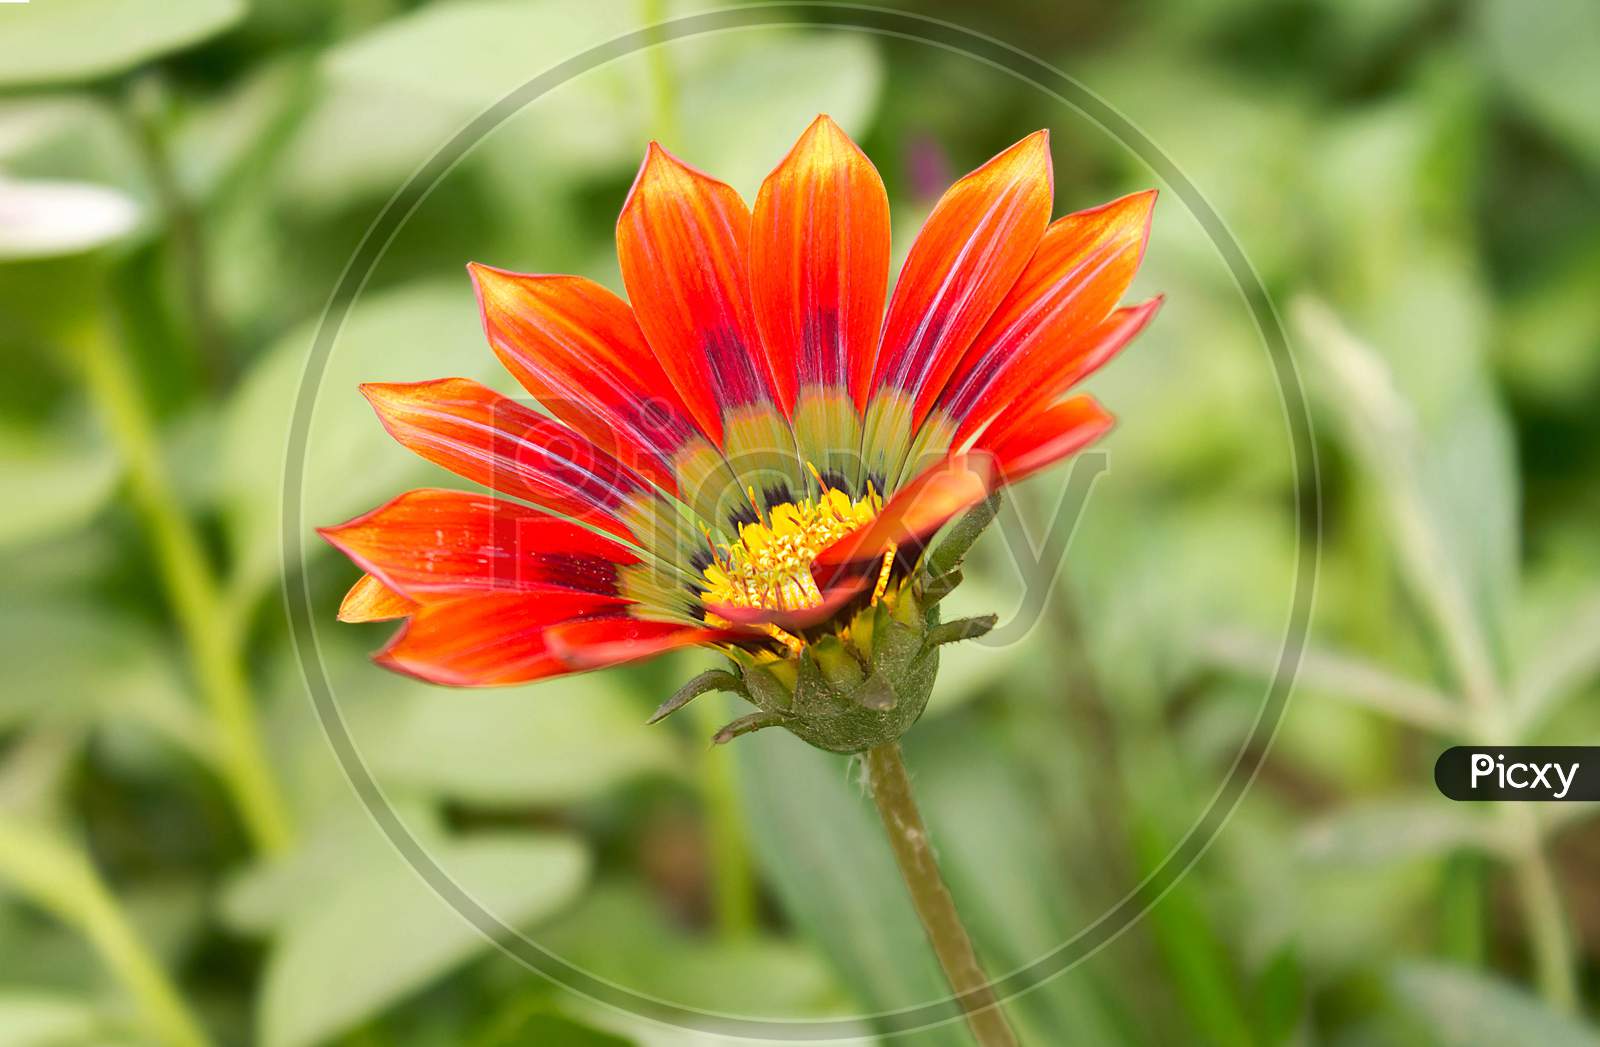 Red Gazania Flower In Natural Background